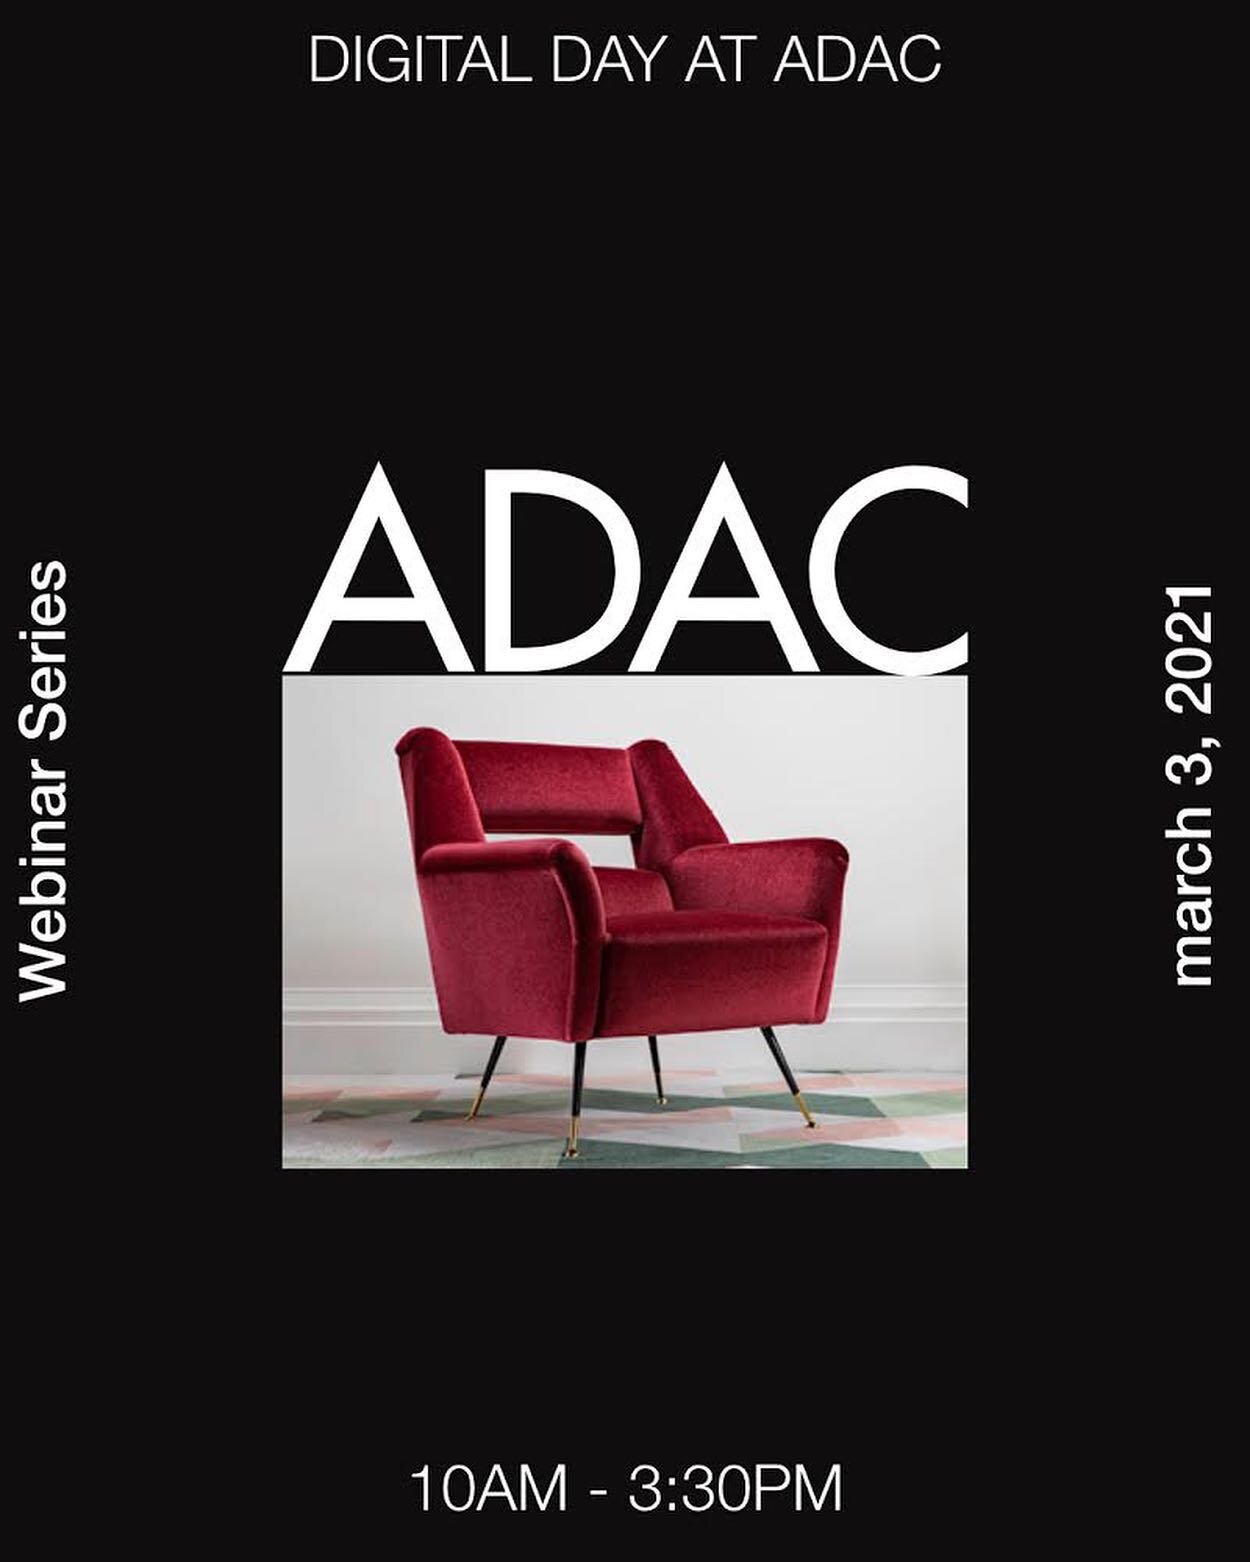 DIGITAL DAY AT ADAC&nbsp;&nbsp;hosted by @adacatlanta will be open on: 03.03.2021 @10AM ET
...
Online: Yes
Free: Yes
...
Digital Day at ADAC is a forum for novices and experts alike to learn and share ideas, so designers and the design industry can e